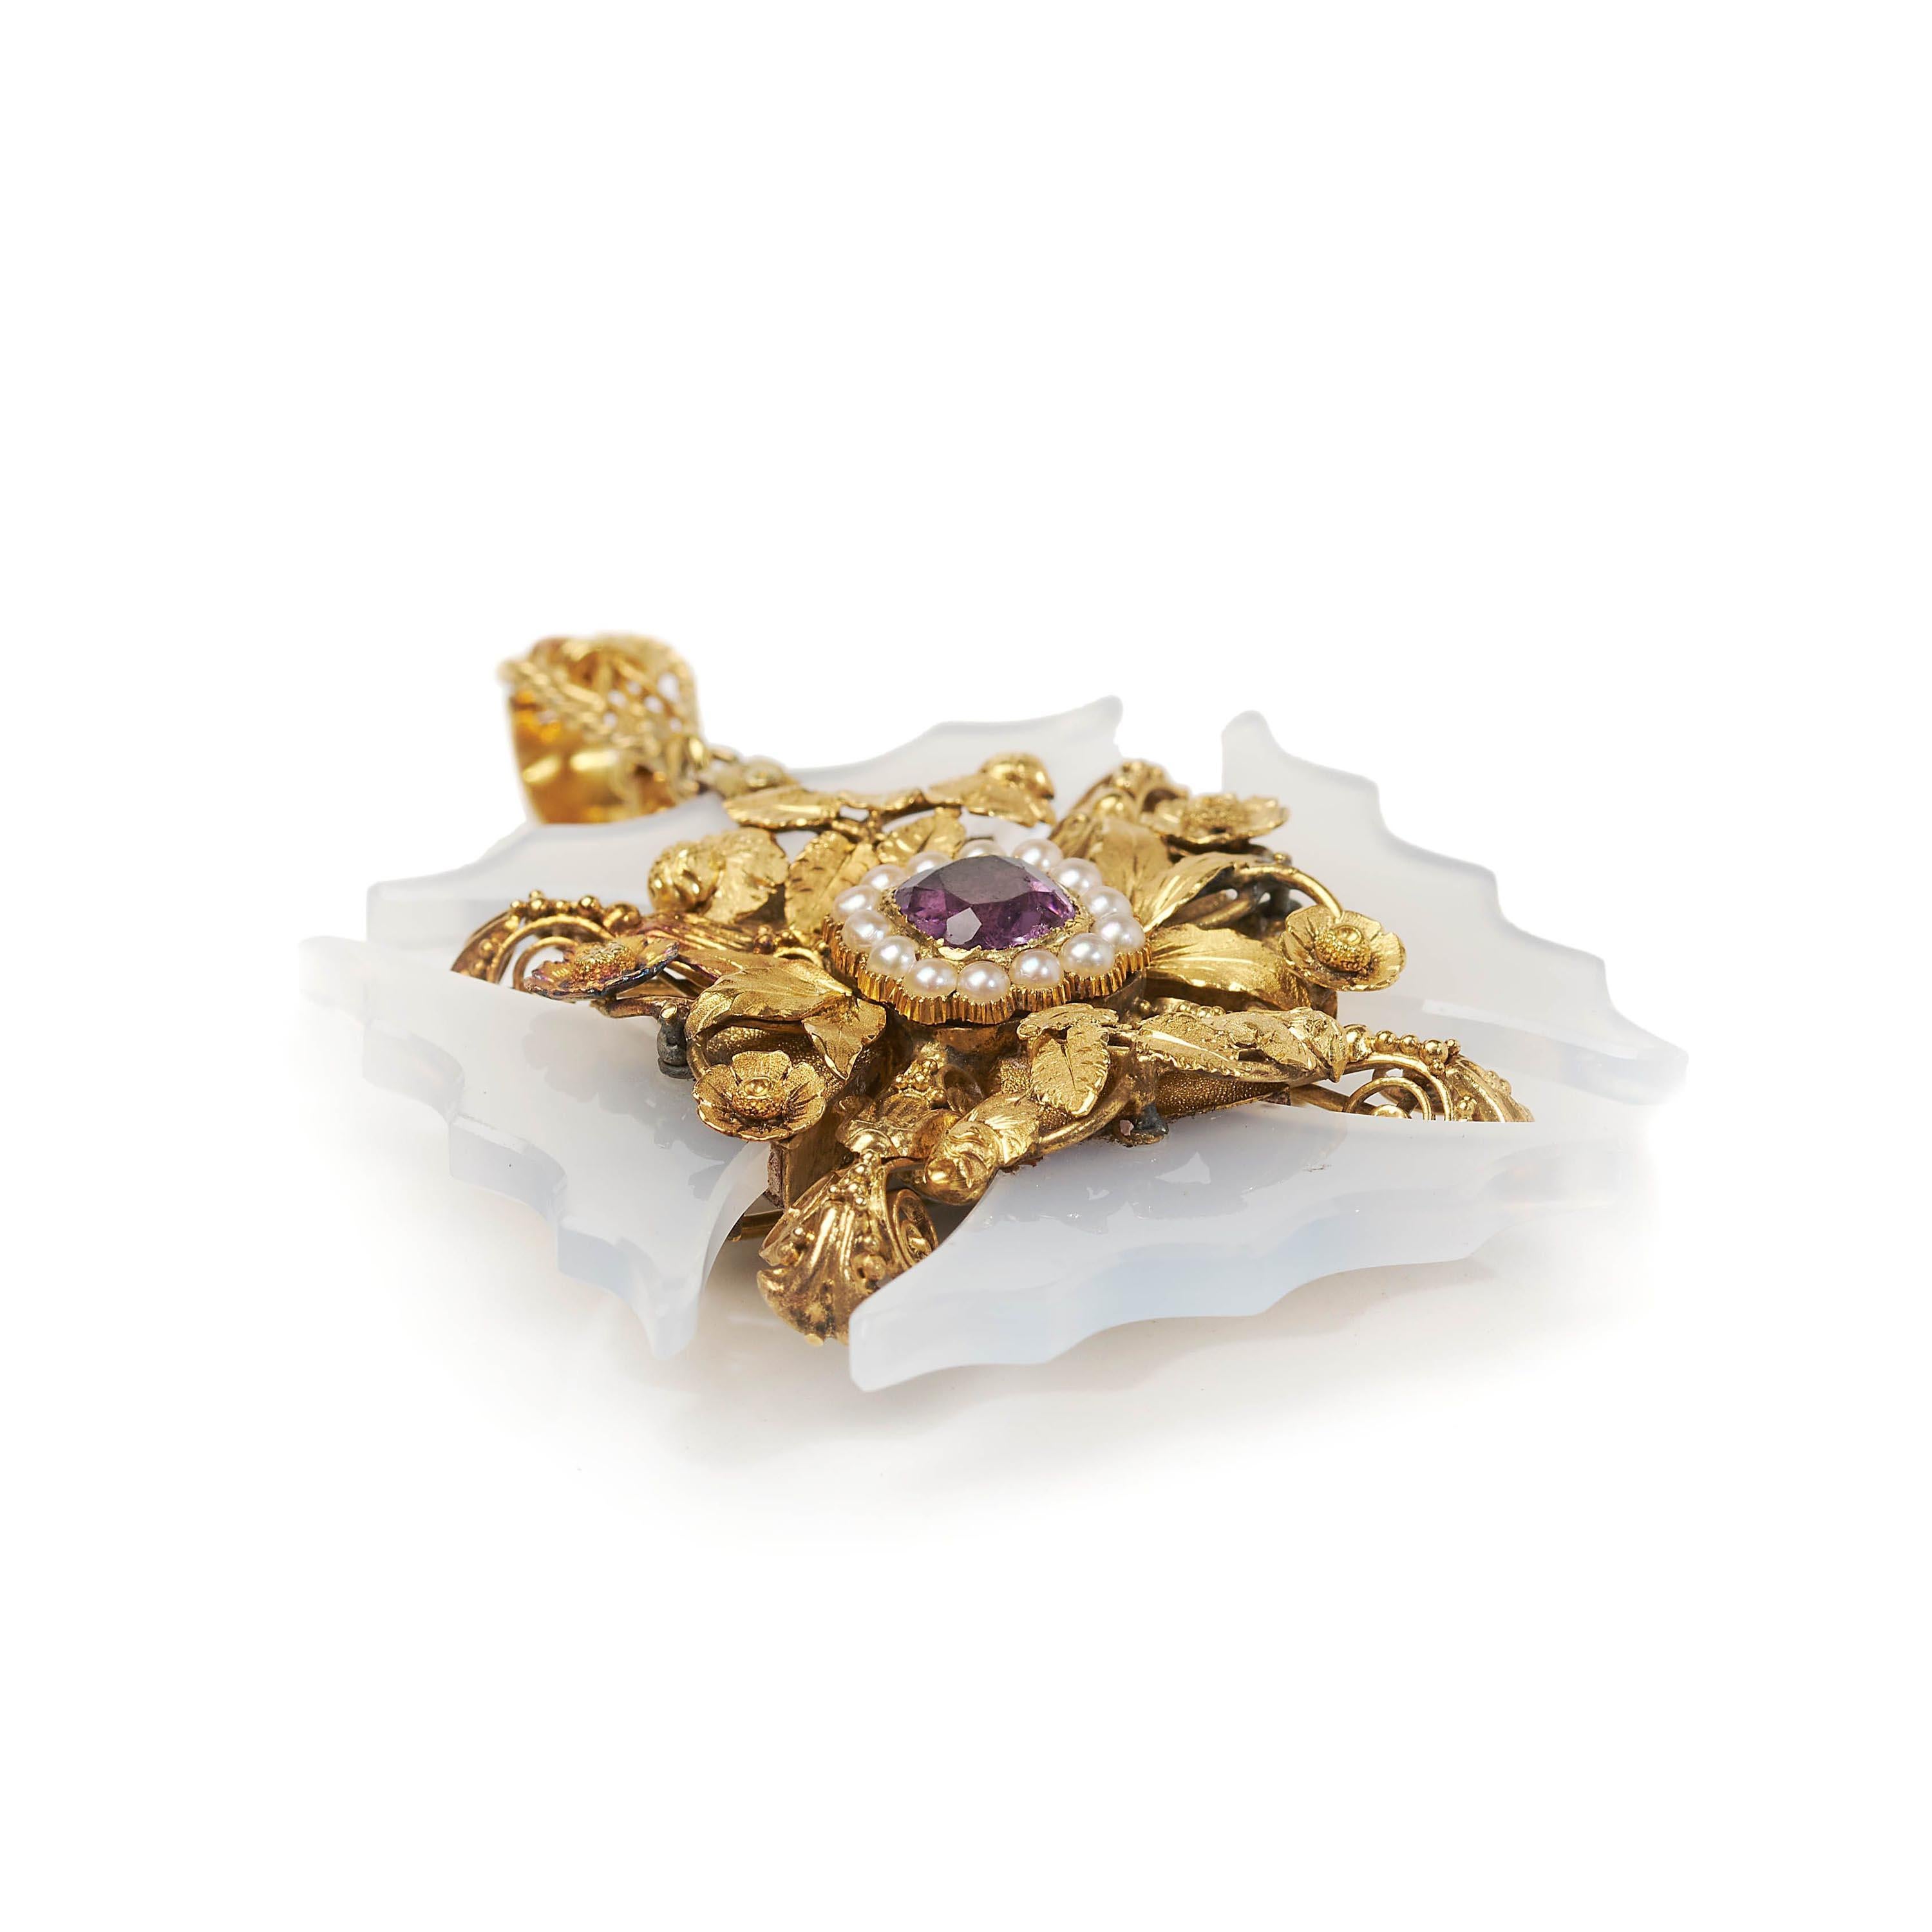 A Georgian cross pattée, with a faceted, cushion shaped amethyst, set in the centre, with a cluster surround of natural half seed pearls, in cut down style settings, in a delicate, silver gilt and 15ct gold mount, of individual flowers, leaves,